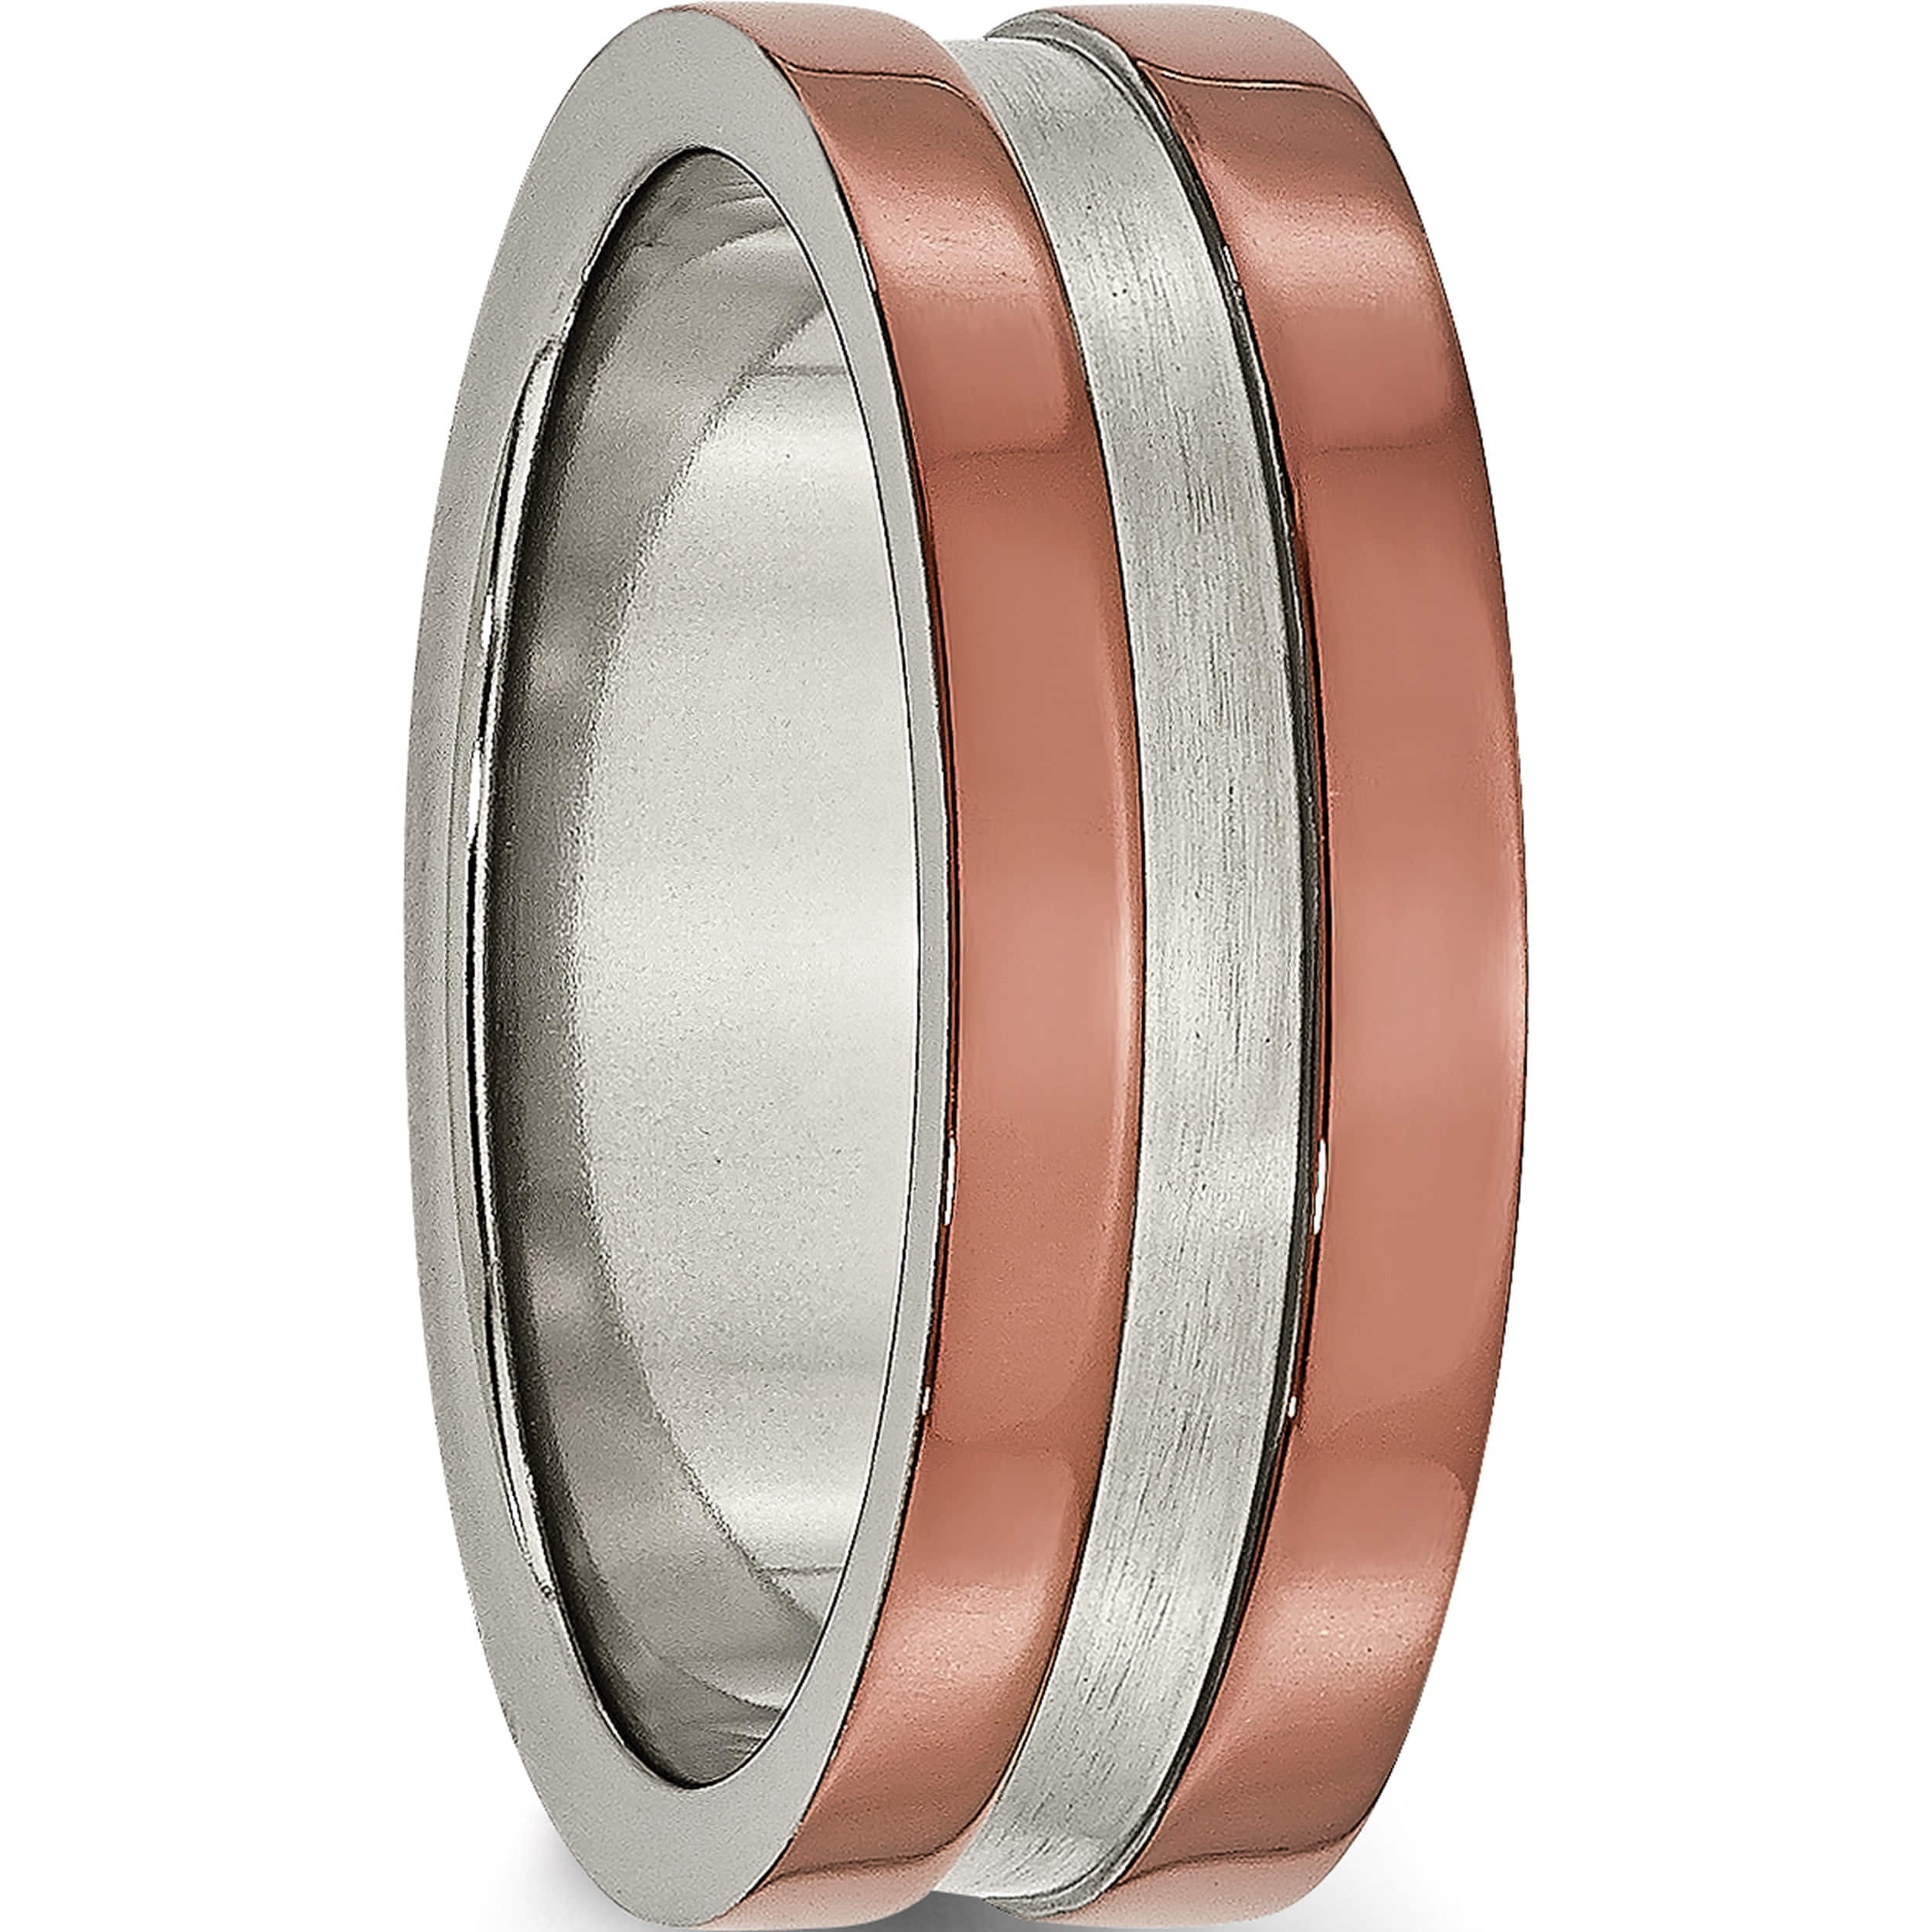 Jewelry Adviser Rings Titanium Grooved Edge 8mm Brown IP-plated Brushed/Polished Band